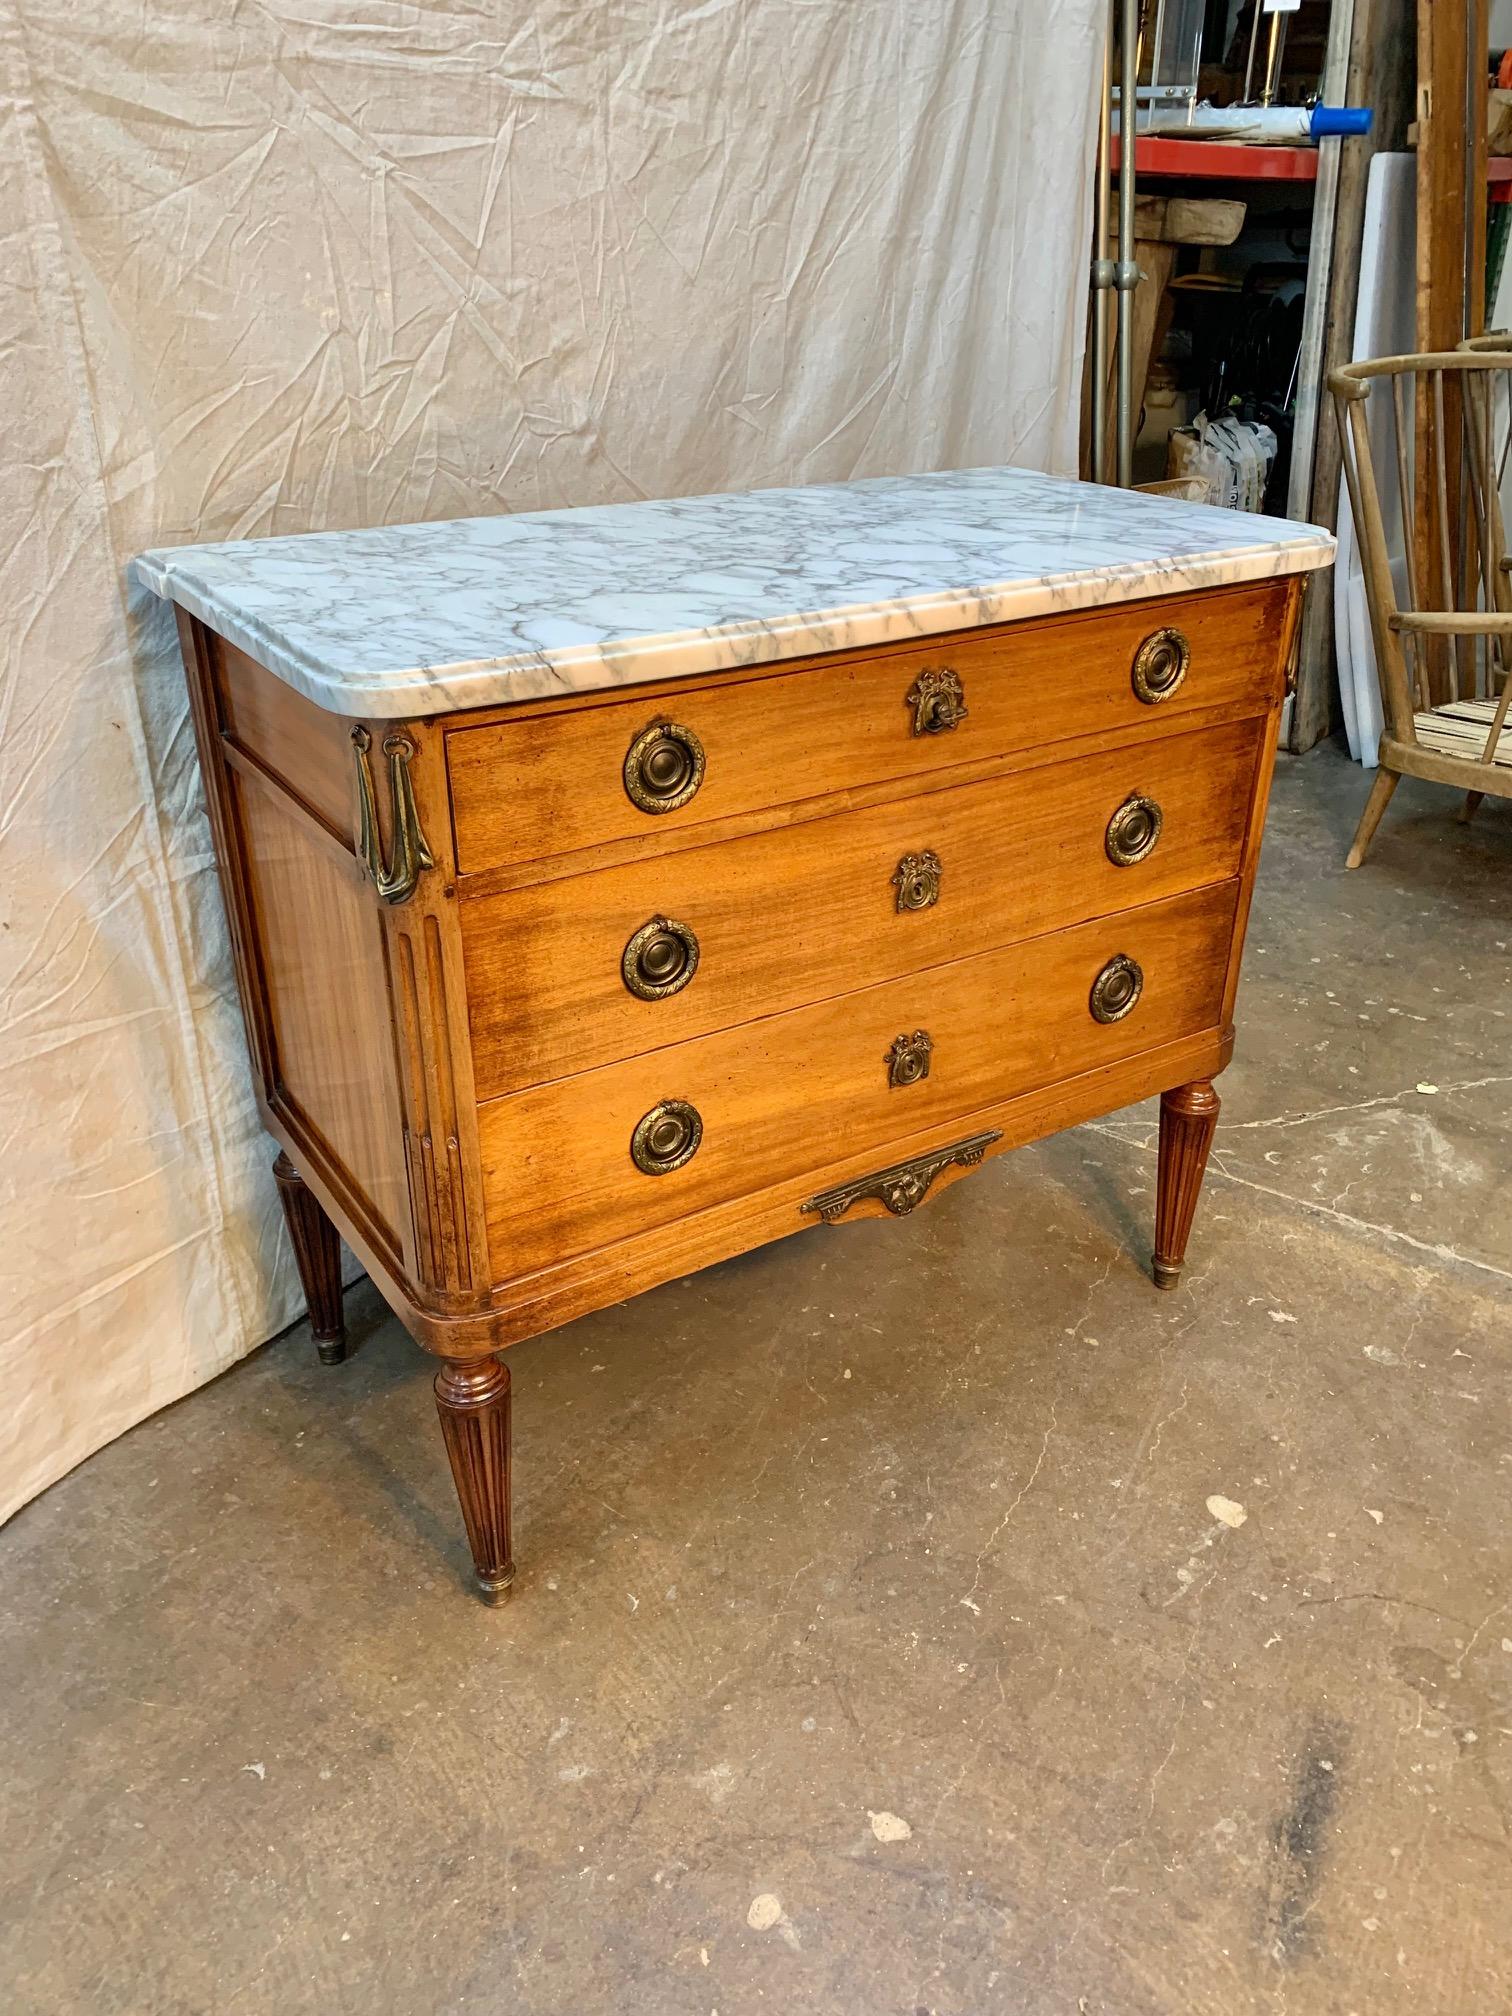 Found in the South of France, this early 20th Century French Louis XVI Style Chest of Drawers was crafted in France in the early 1900's from aged walnut and marble. The marble top is original to the piece and features rounded corner edges in the